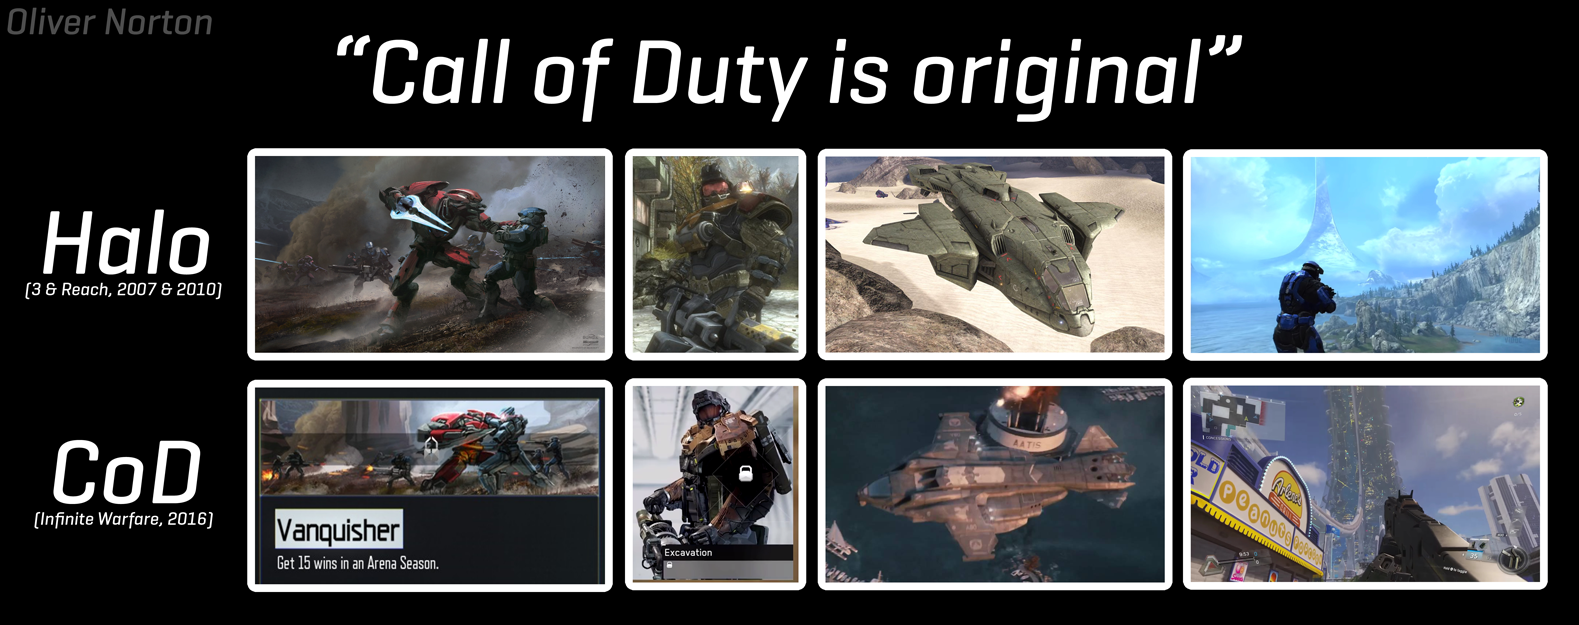 A comparison between past Halo games and new CoD games.